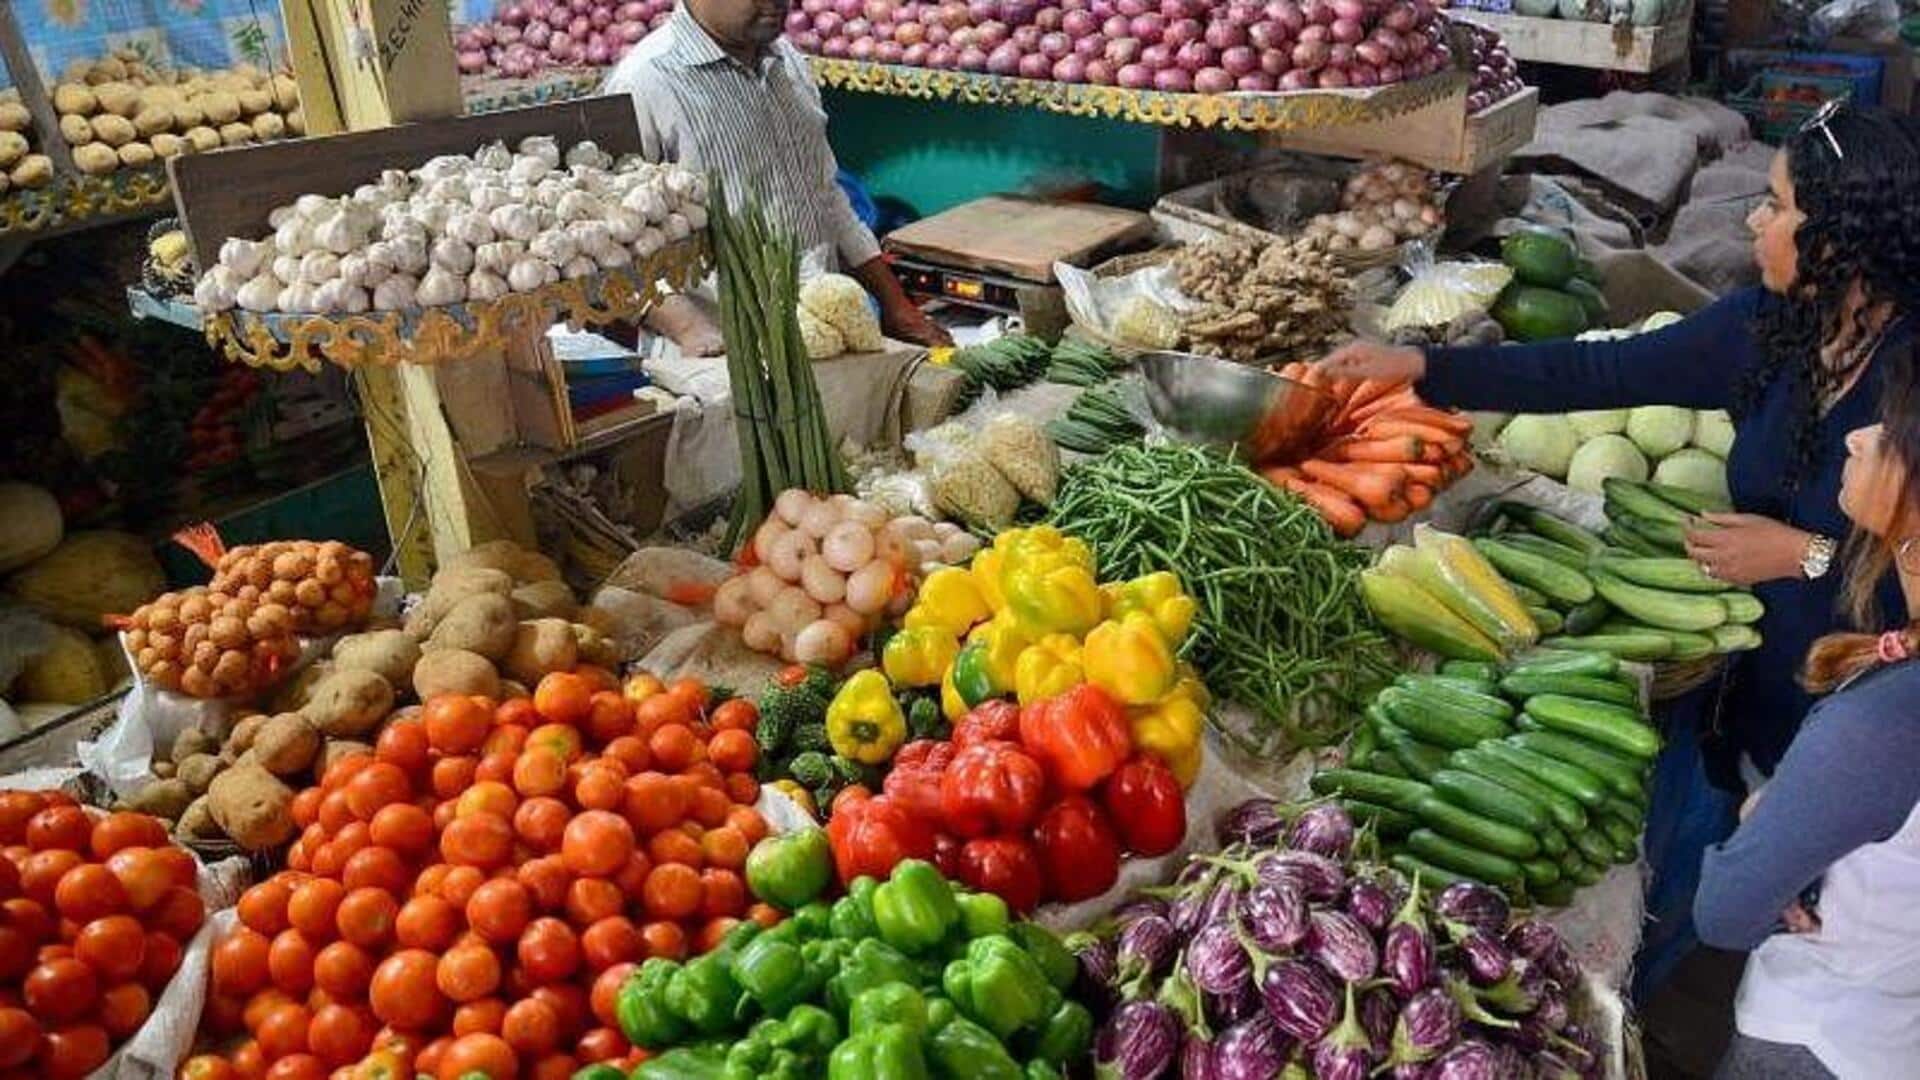 Wholesale price inflation at 8-month high, touches 0.26% this November